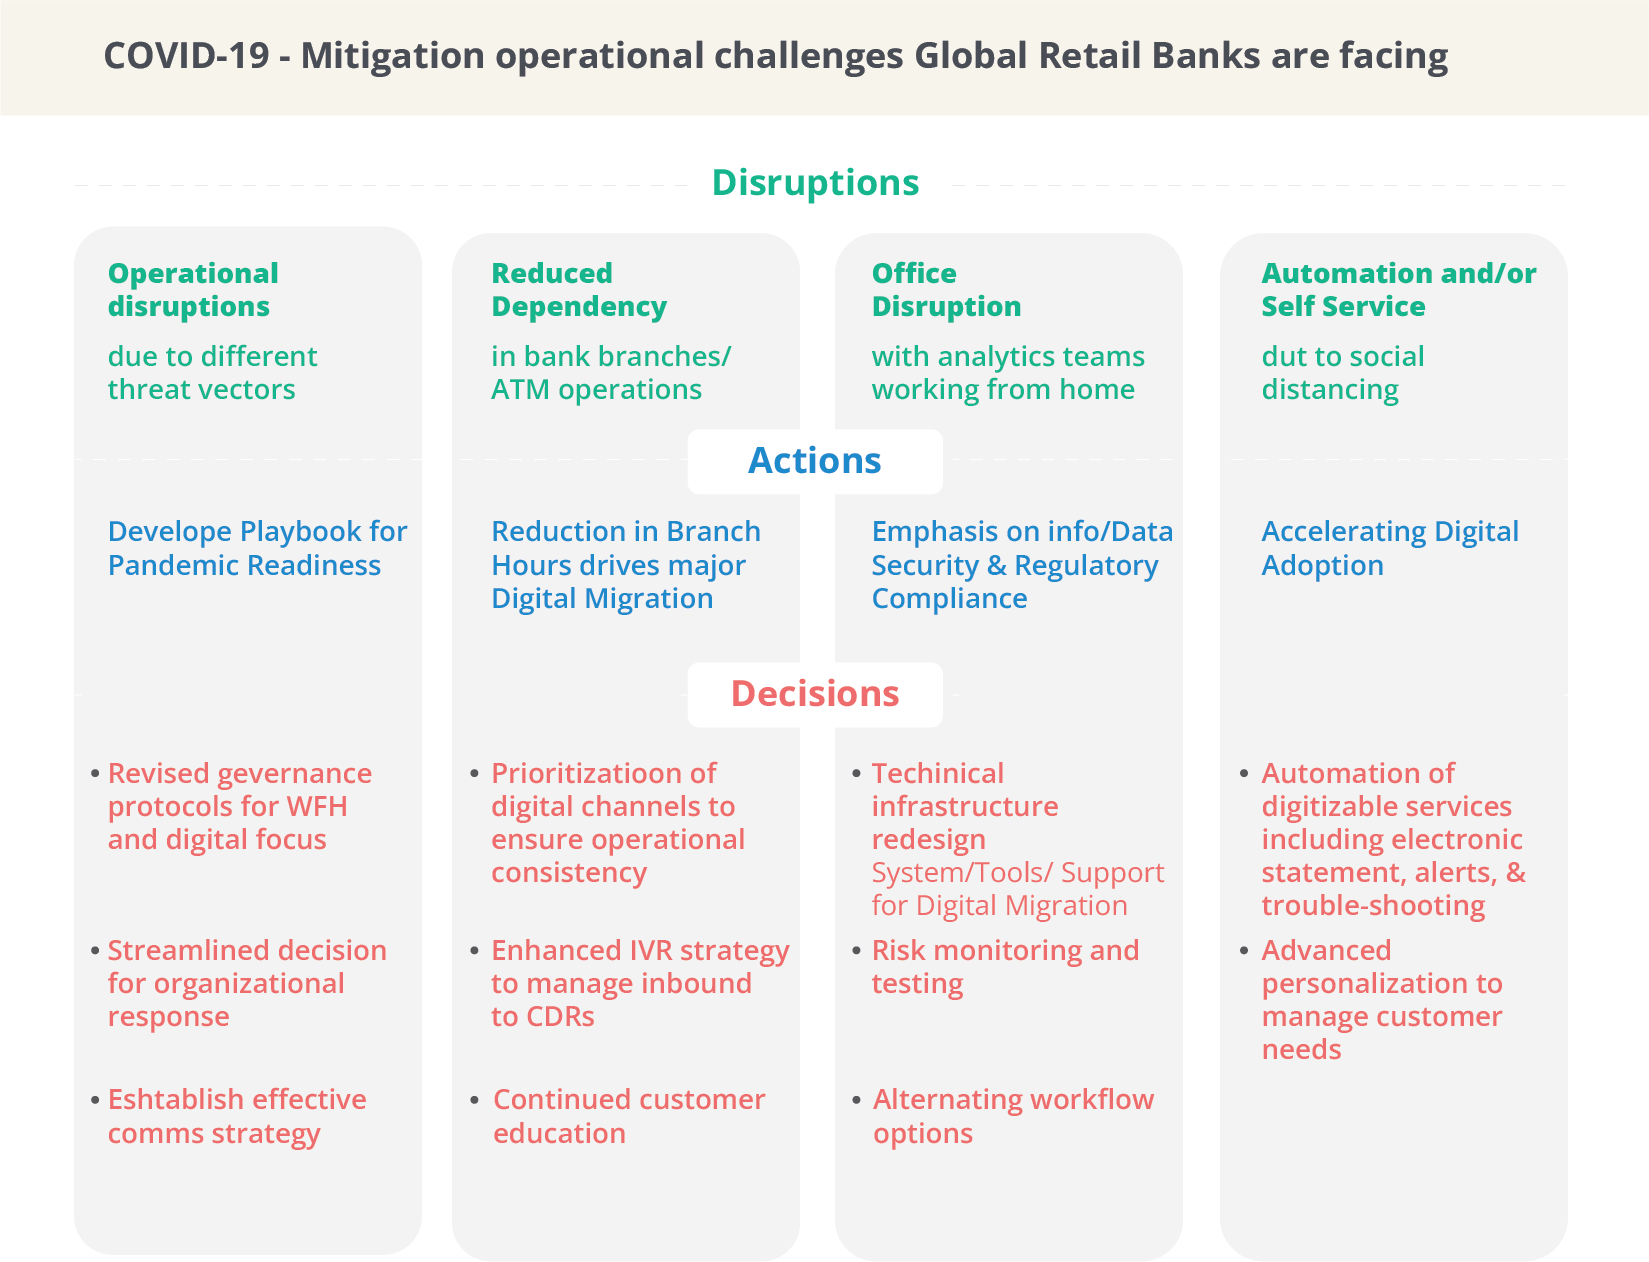 Intelligent Automation: How COVID-19 is presenting an opportunity to combat operational challenges in retail banking